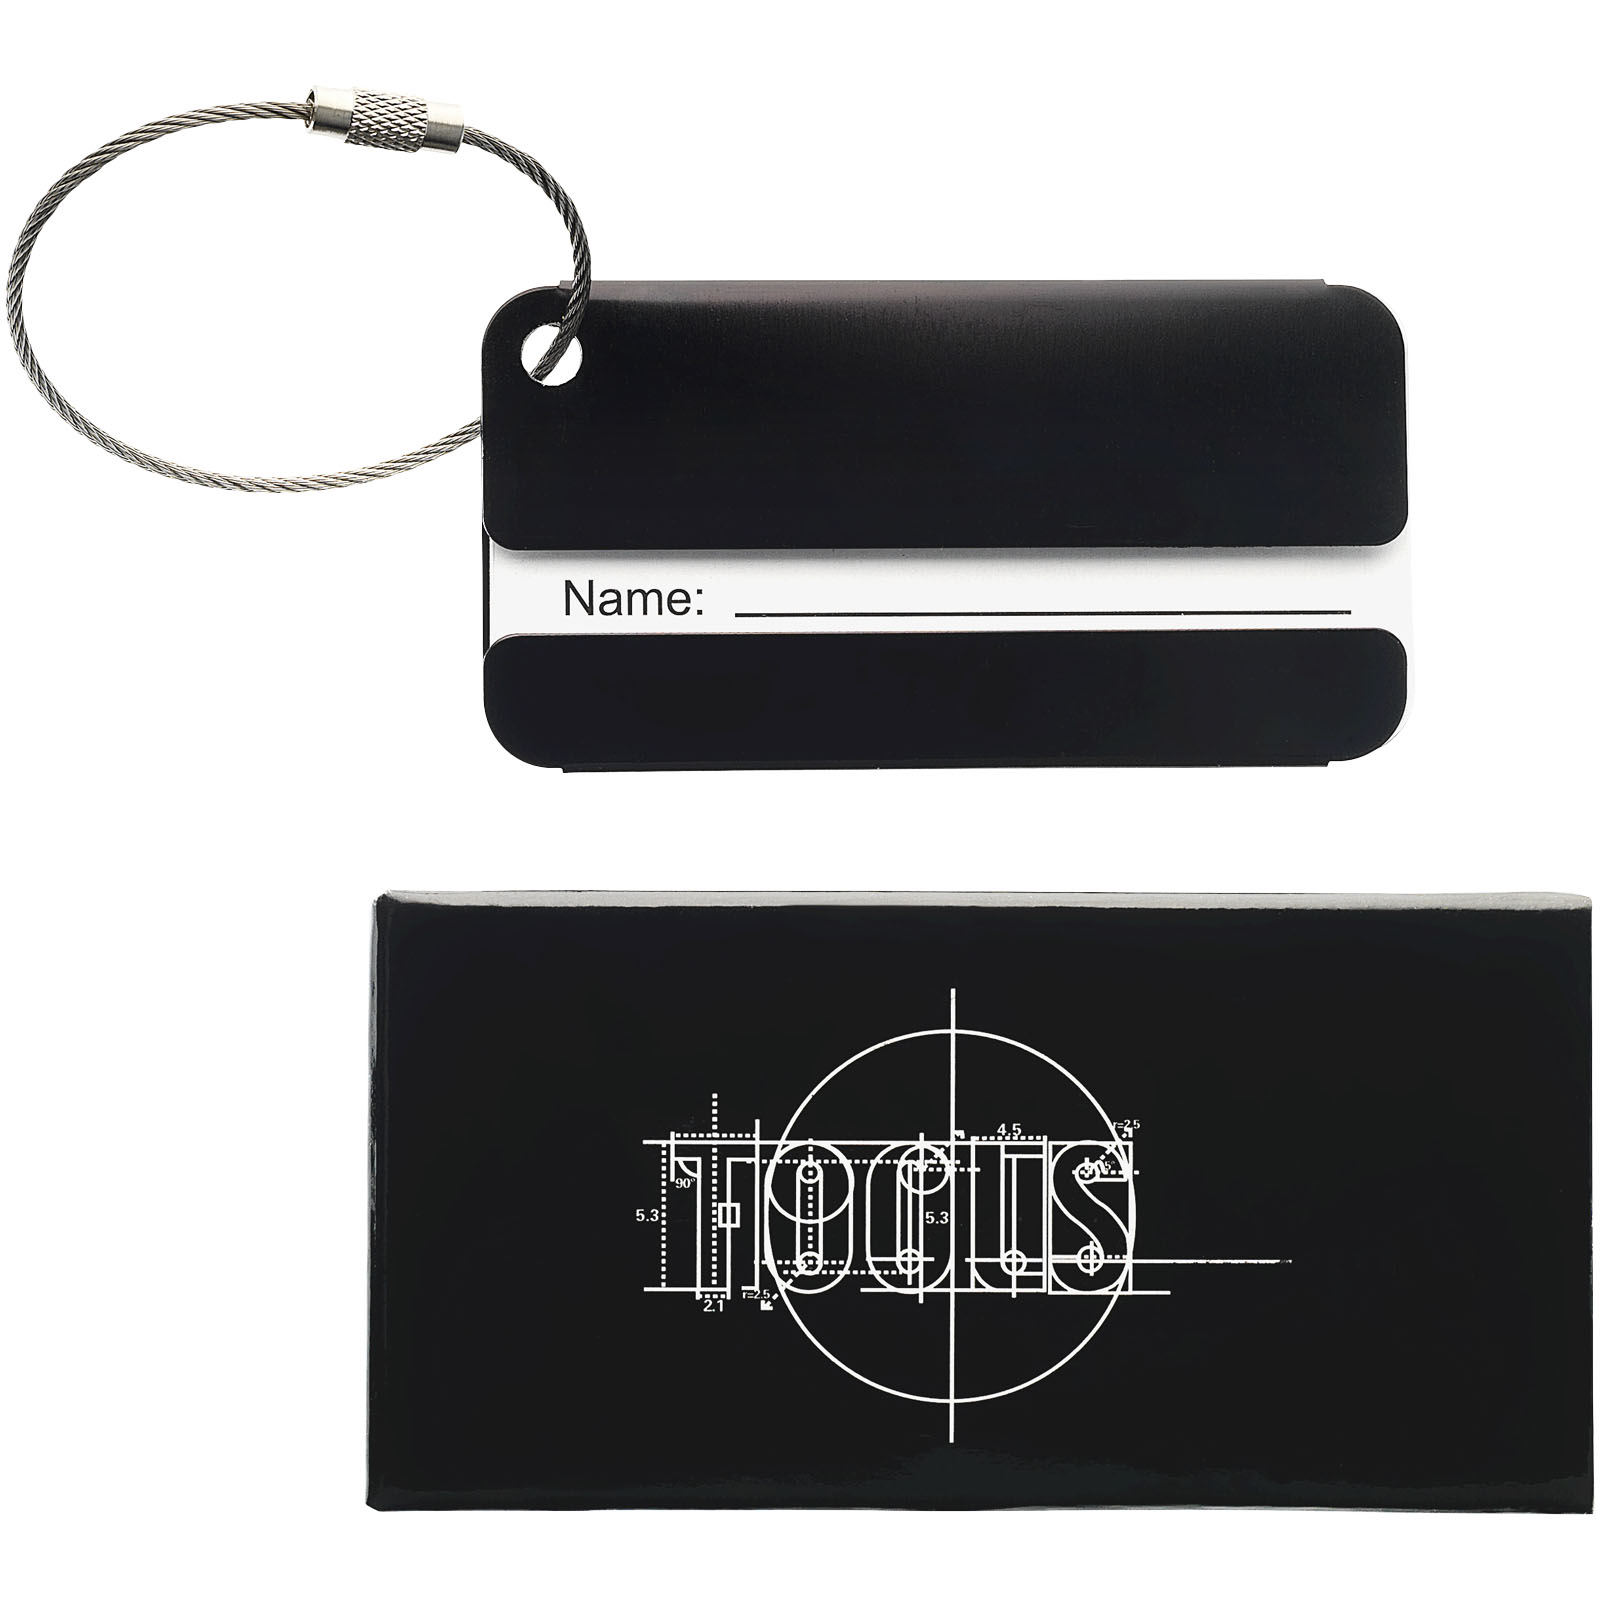 Advertising Travel Accessories - Discovery luggage tag - 1